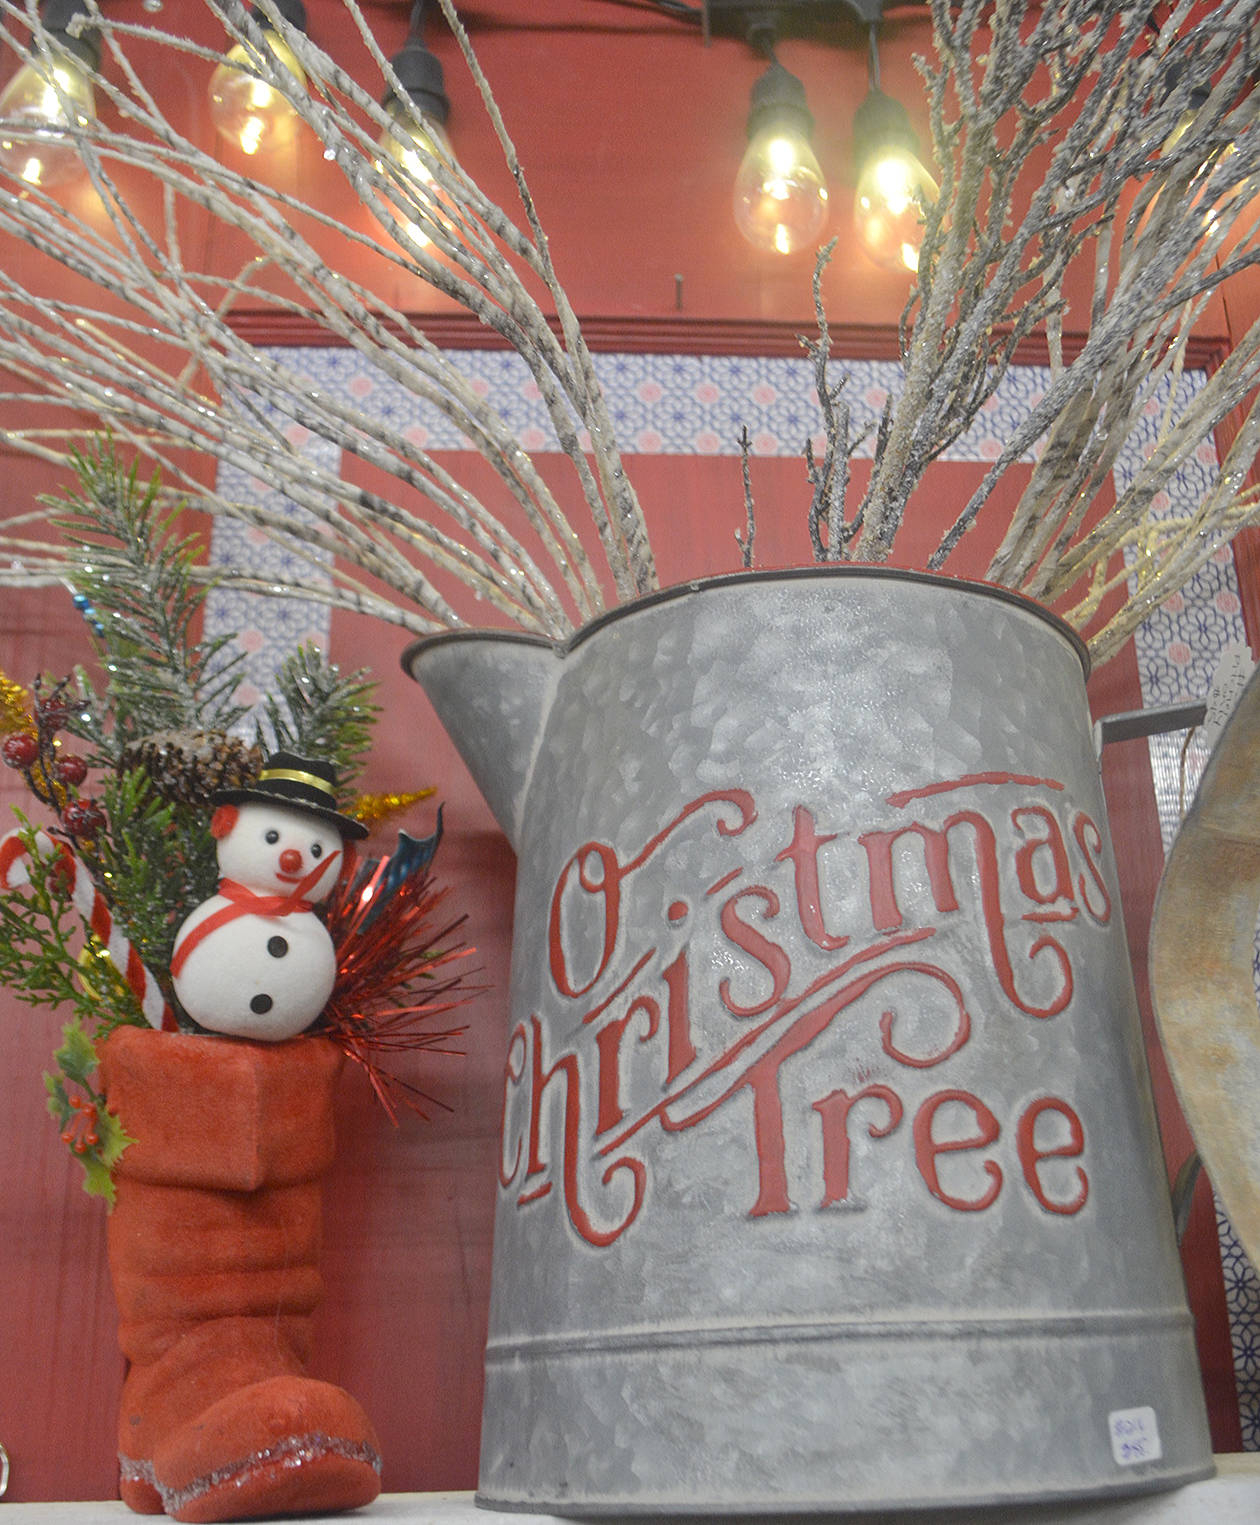 Christmas decorations can be found not only at the Trageser booth, but all around the Red Plantation.